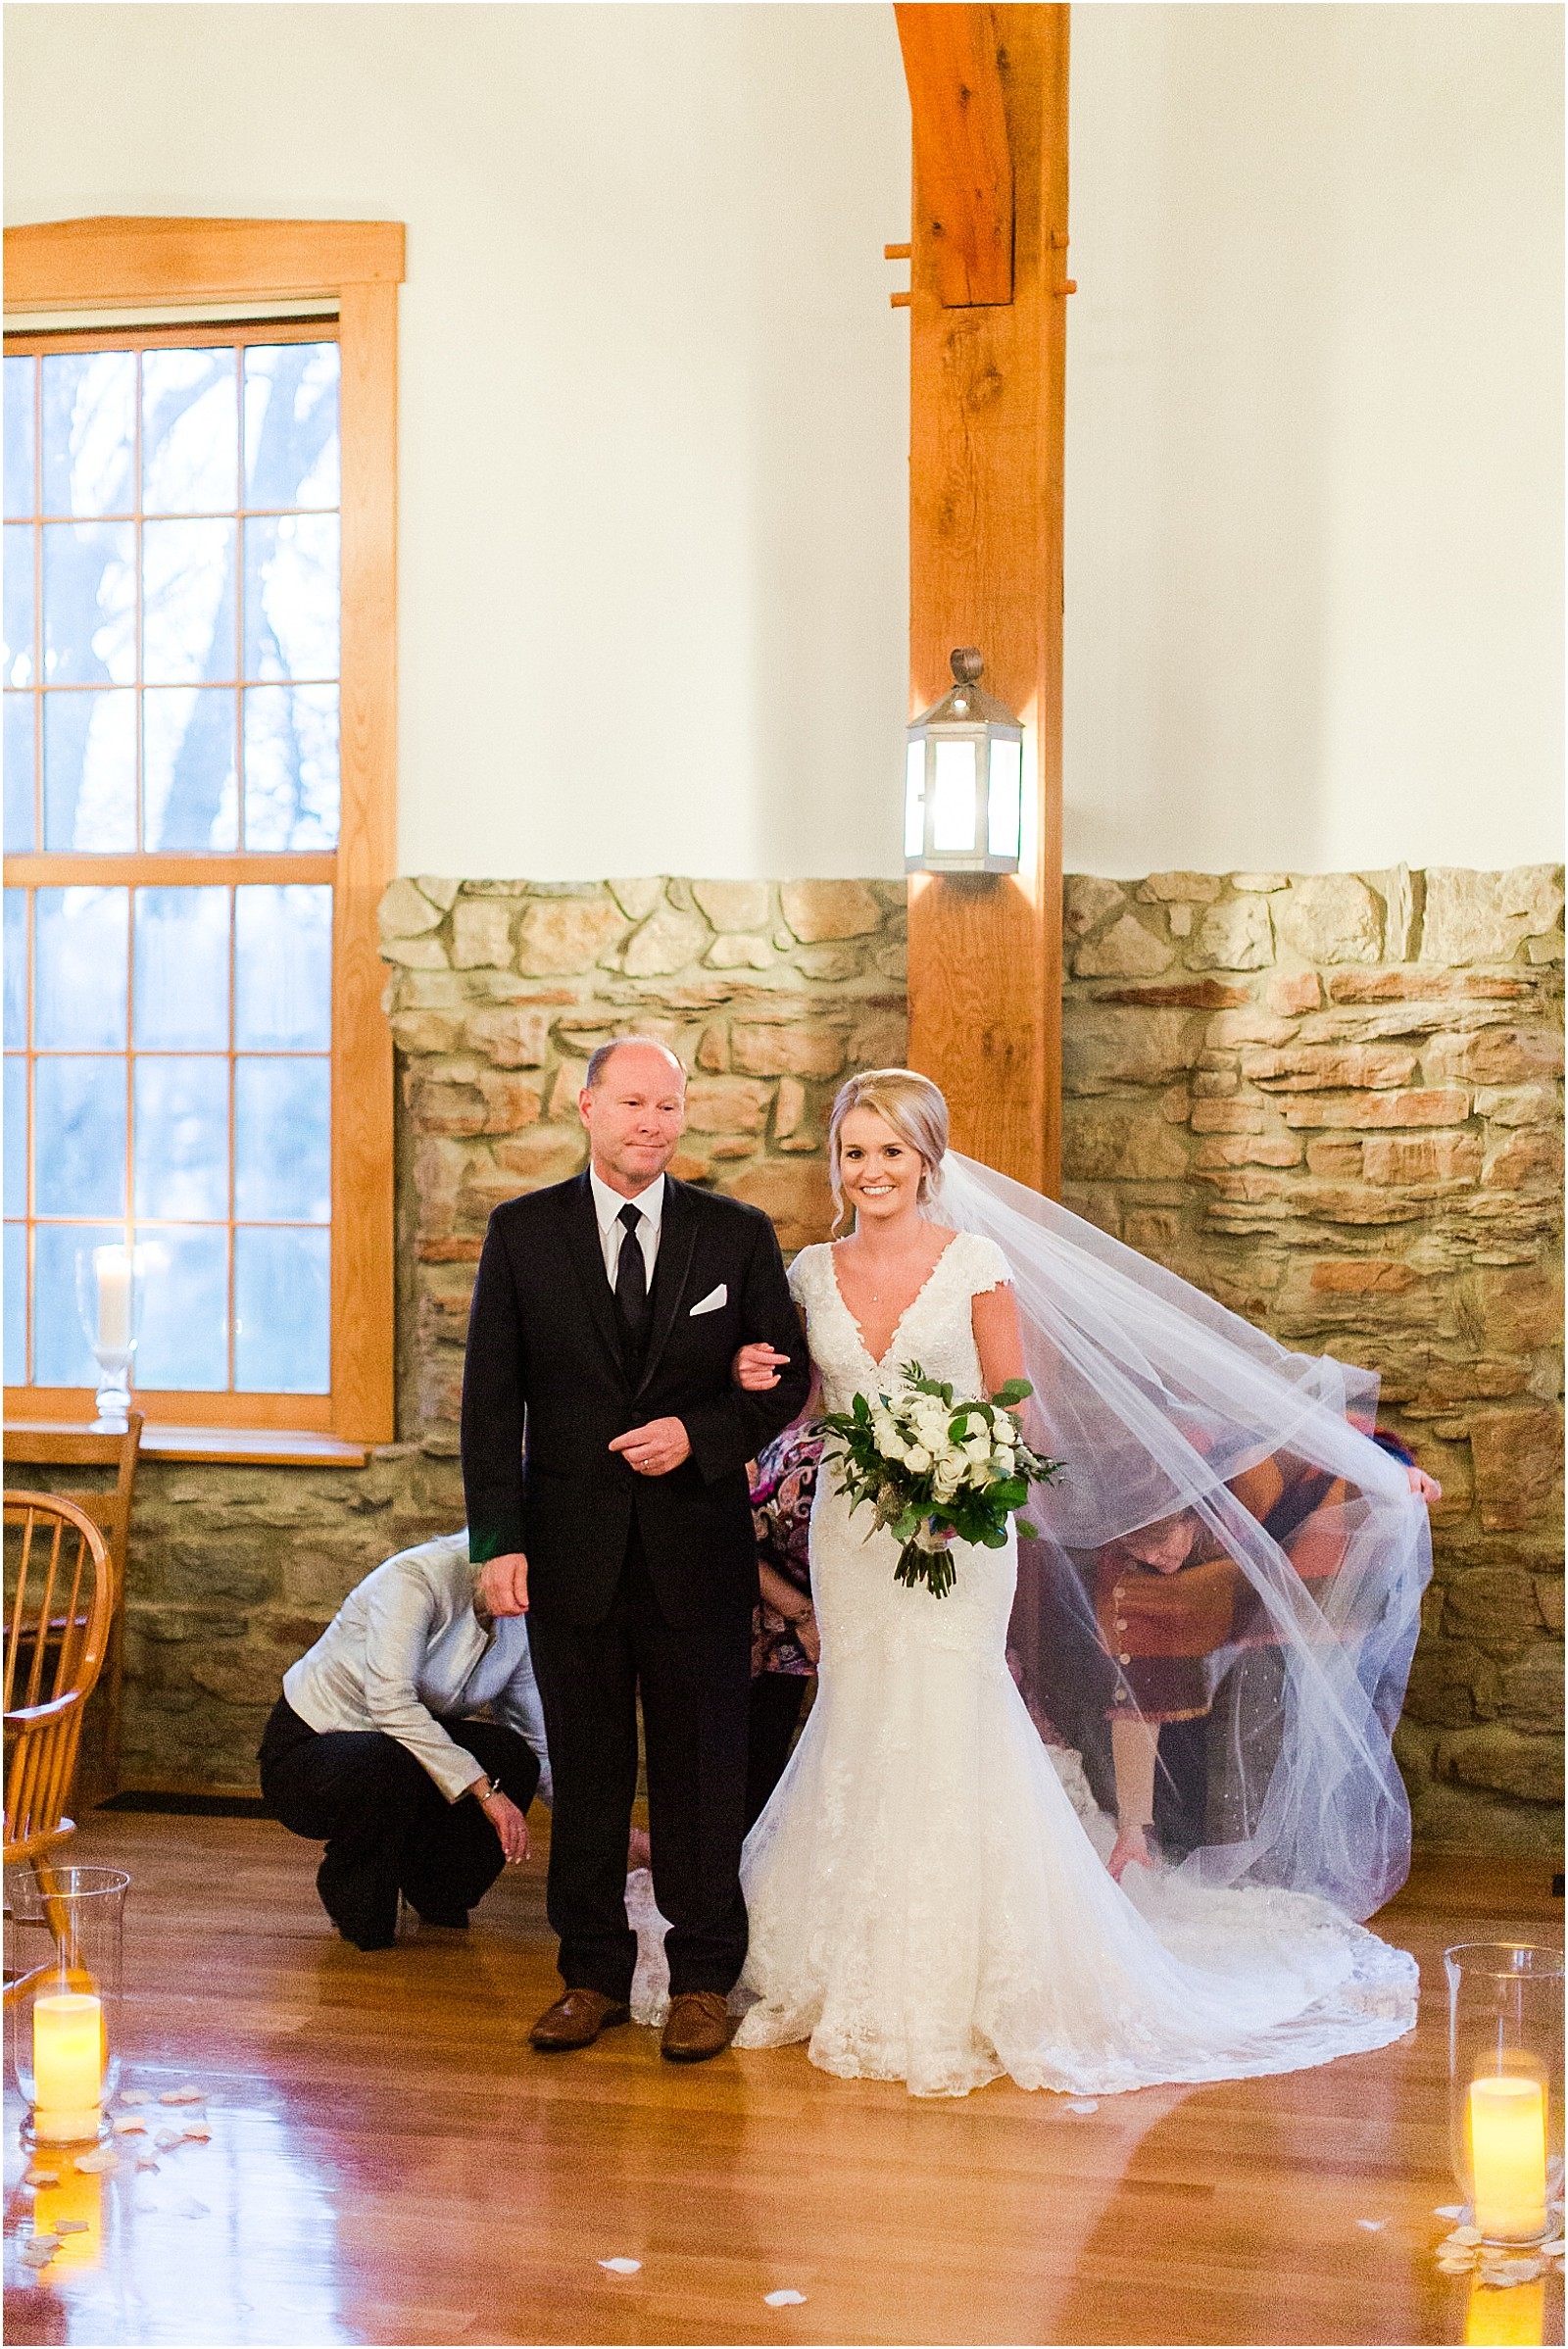 A Classic Winter Wedding in New Harmony | Rachel and Ryan | Bret and Brandie Photography 0109.jpg